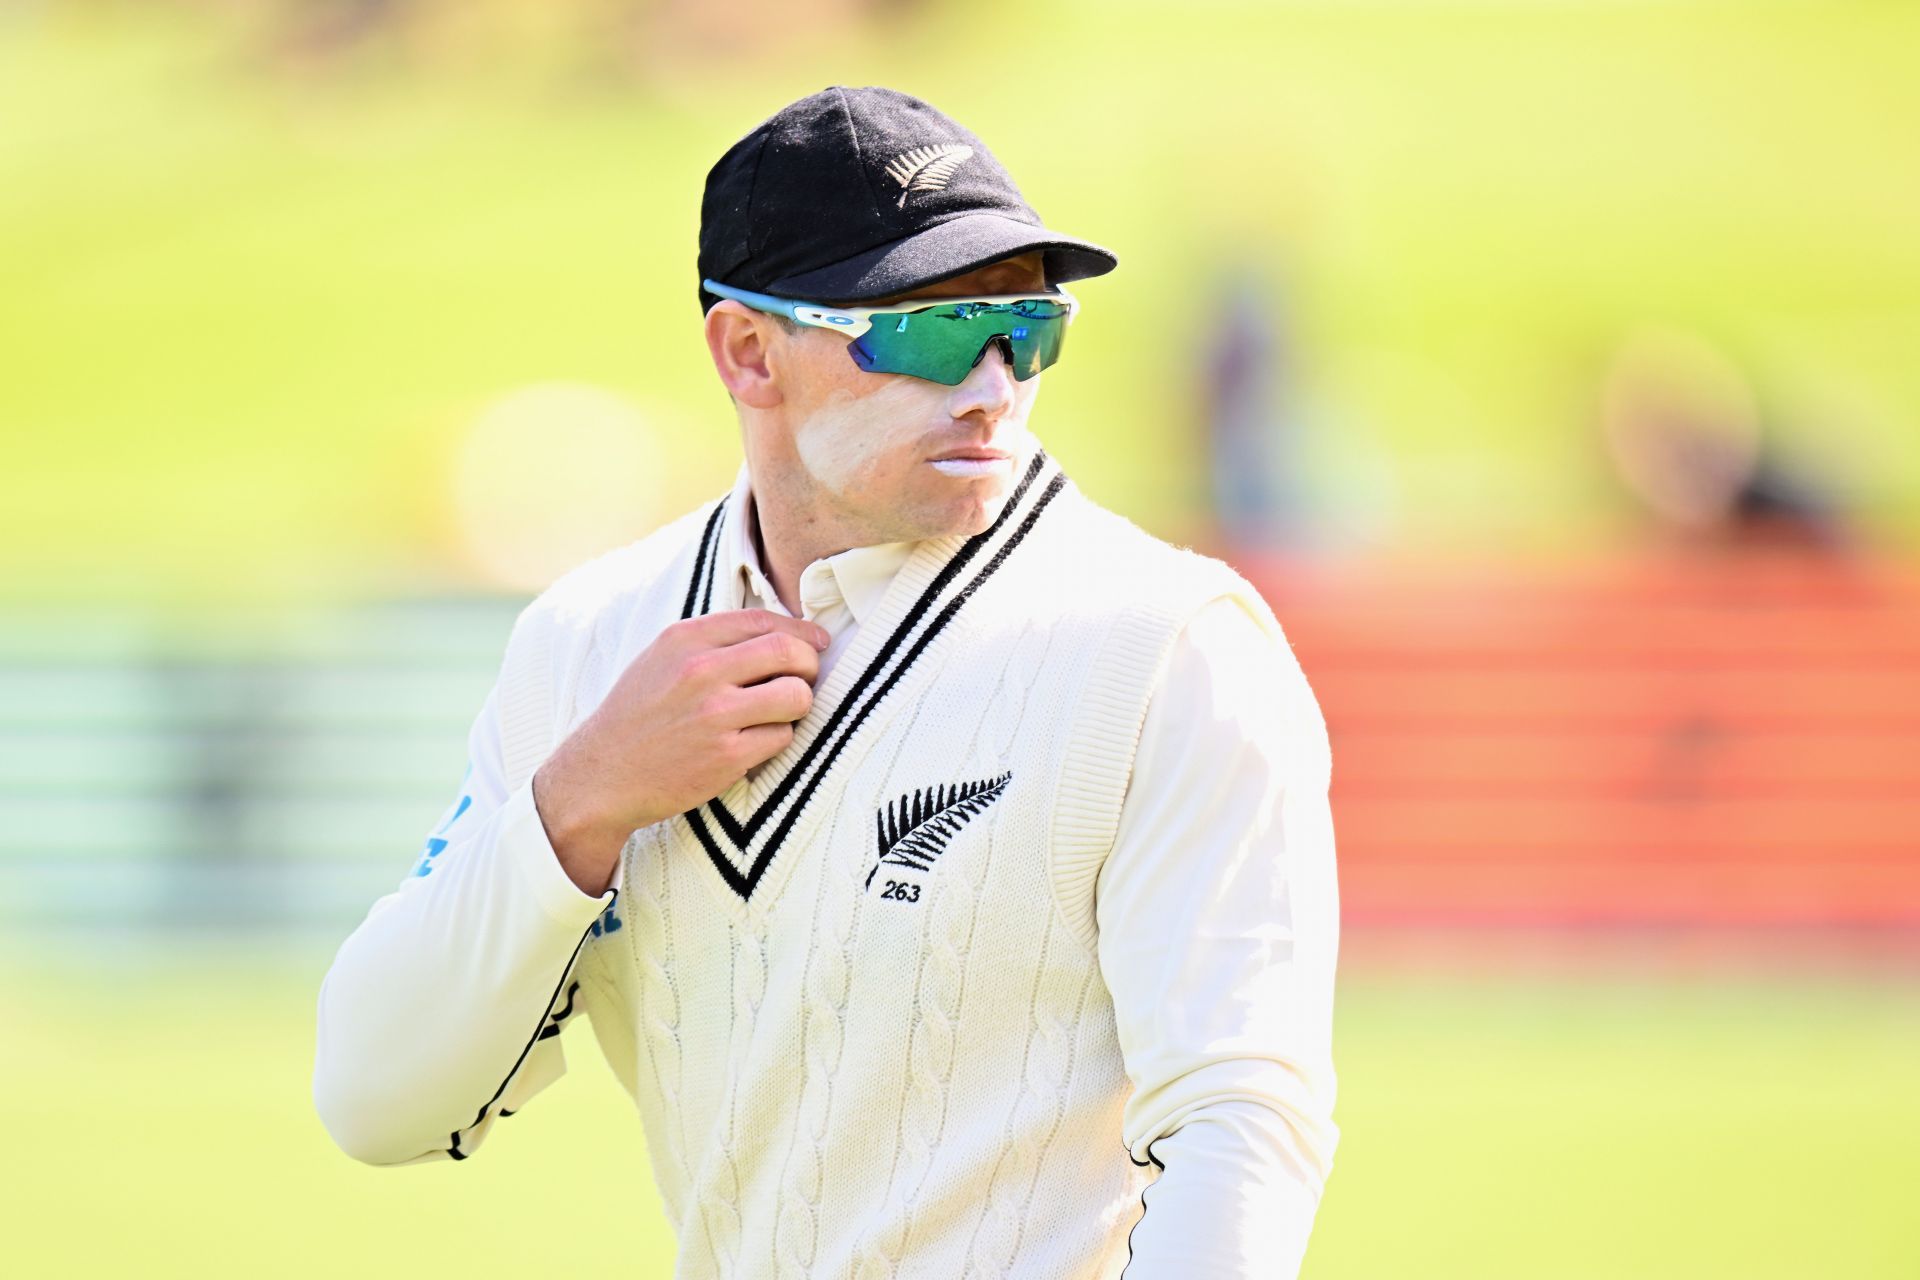 Tom Latham will be leading New Zealand against County Select XI (Image courtesy: Getty Images)